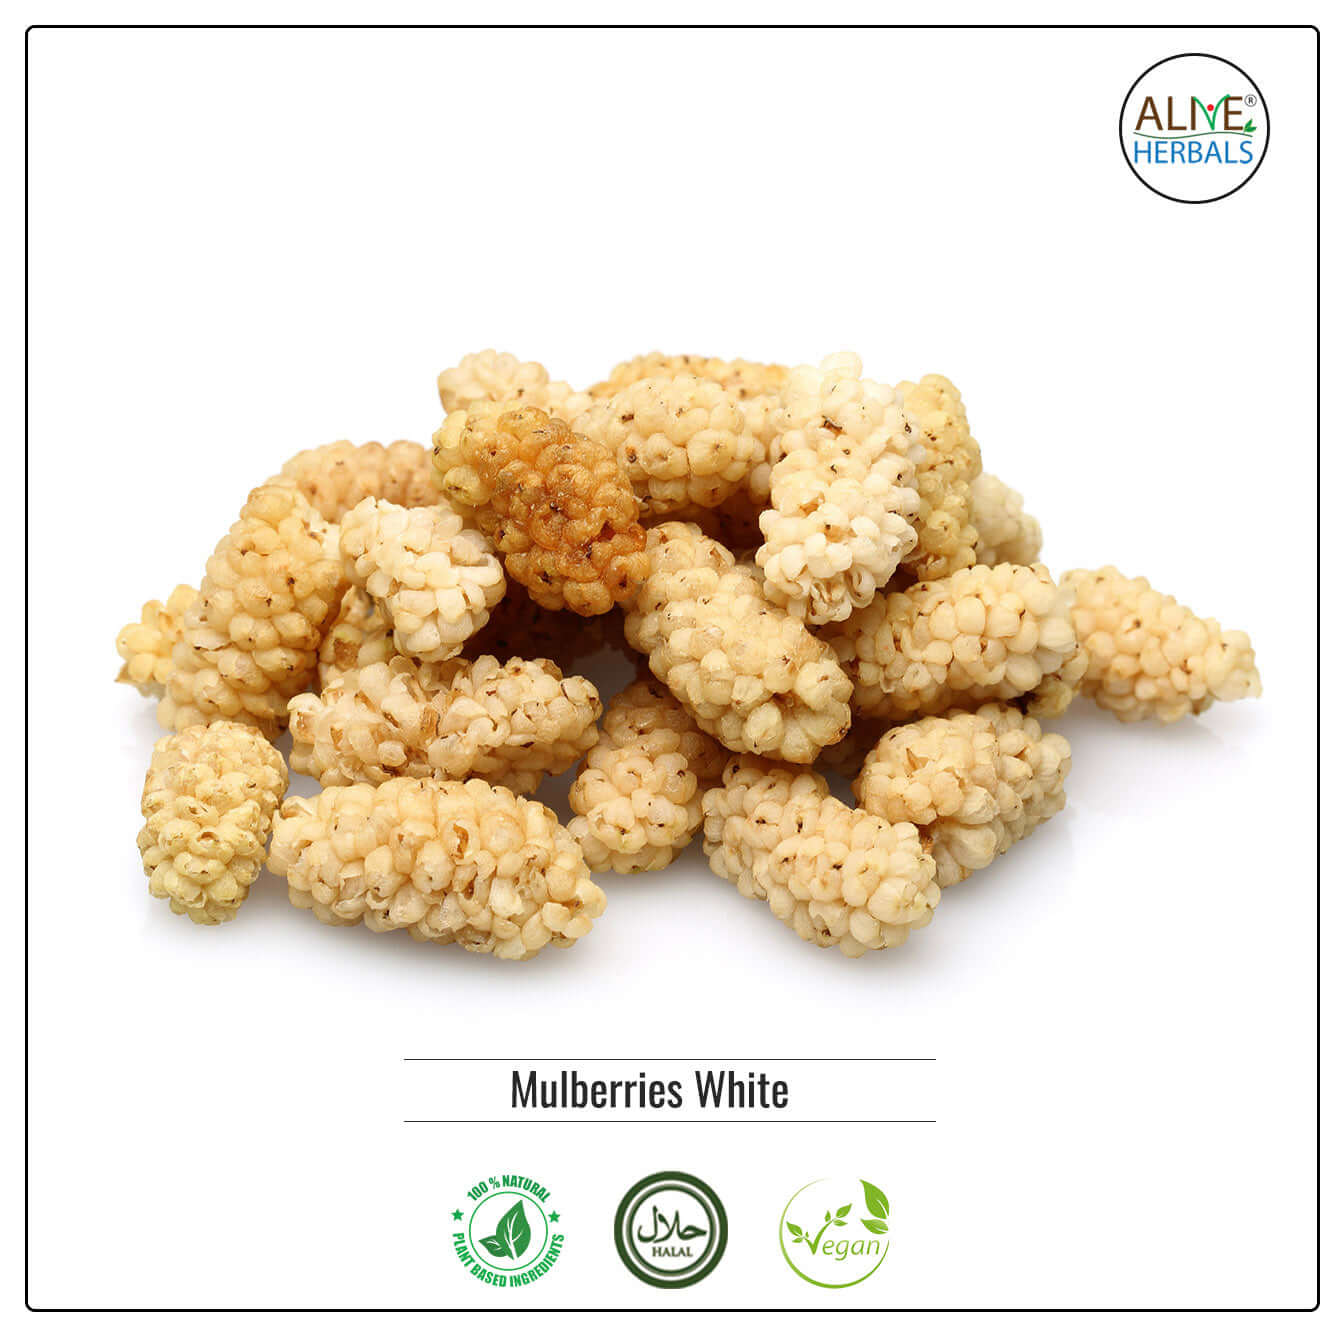 Dried White Mulberries - Buy at Natural Food Store | Alive Herbals.